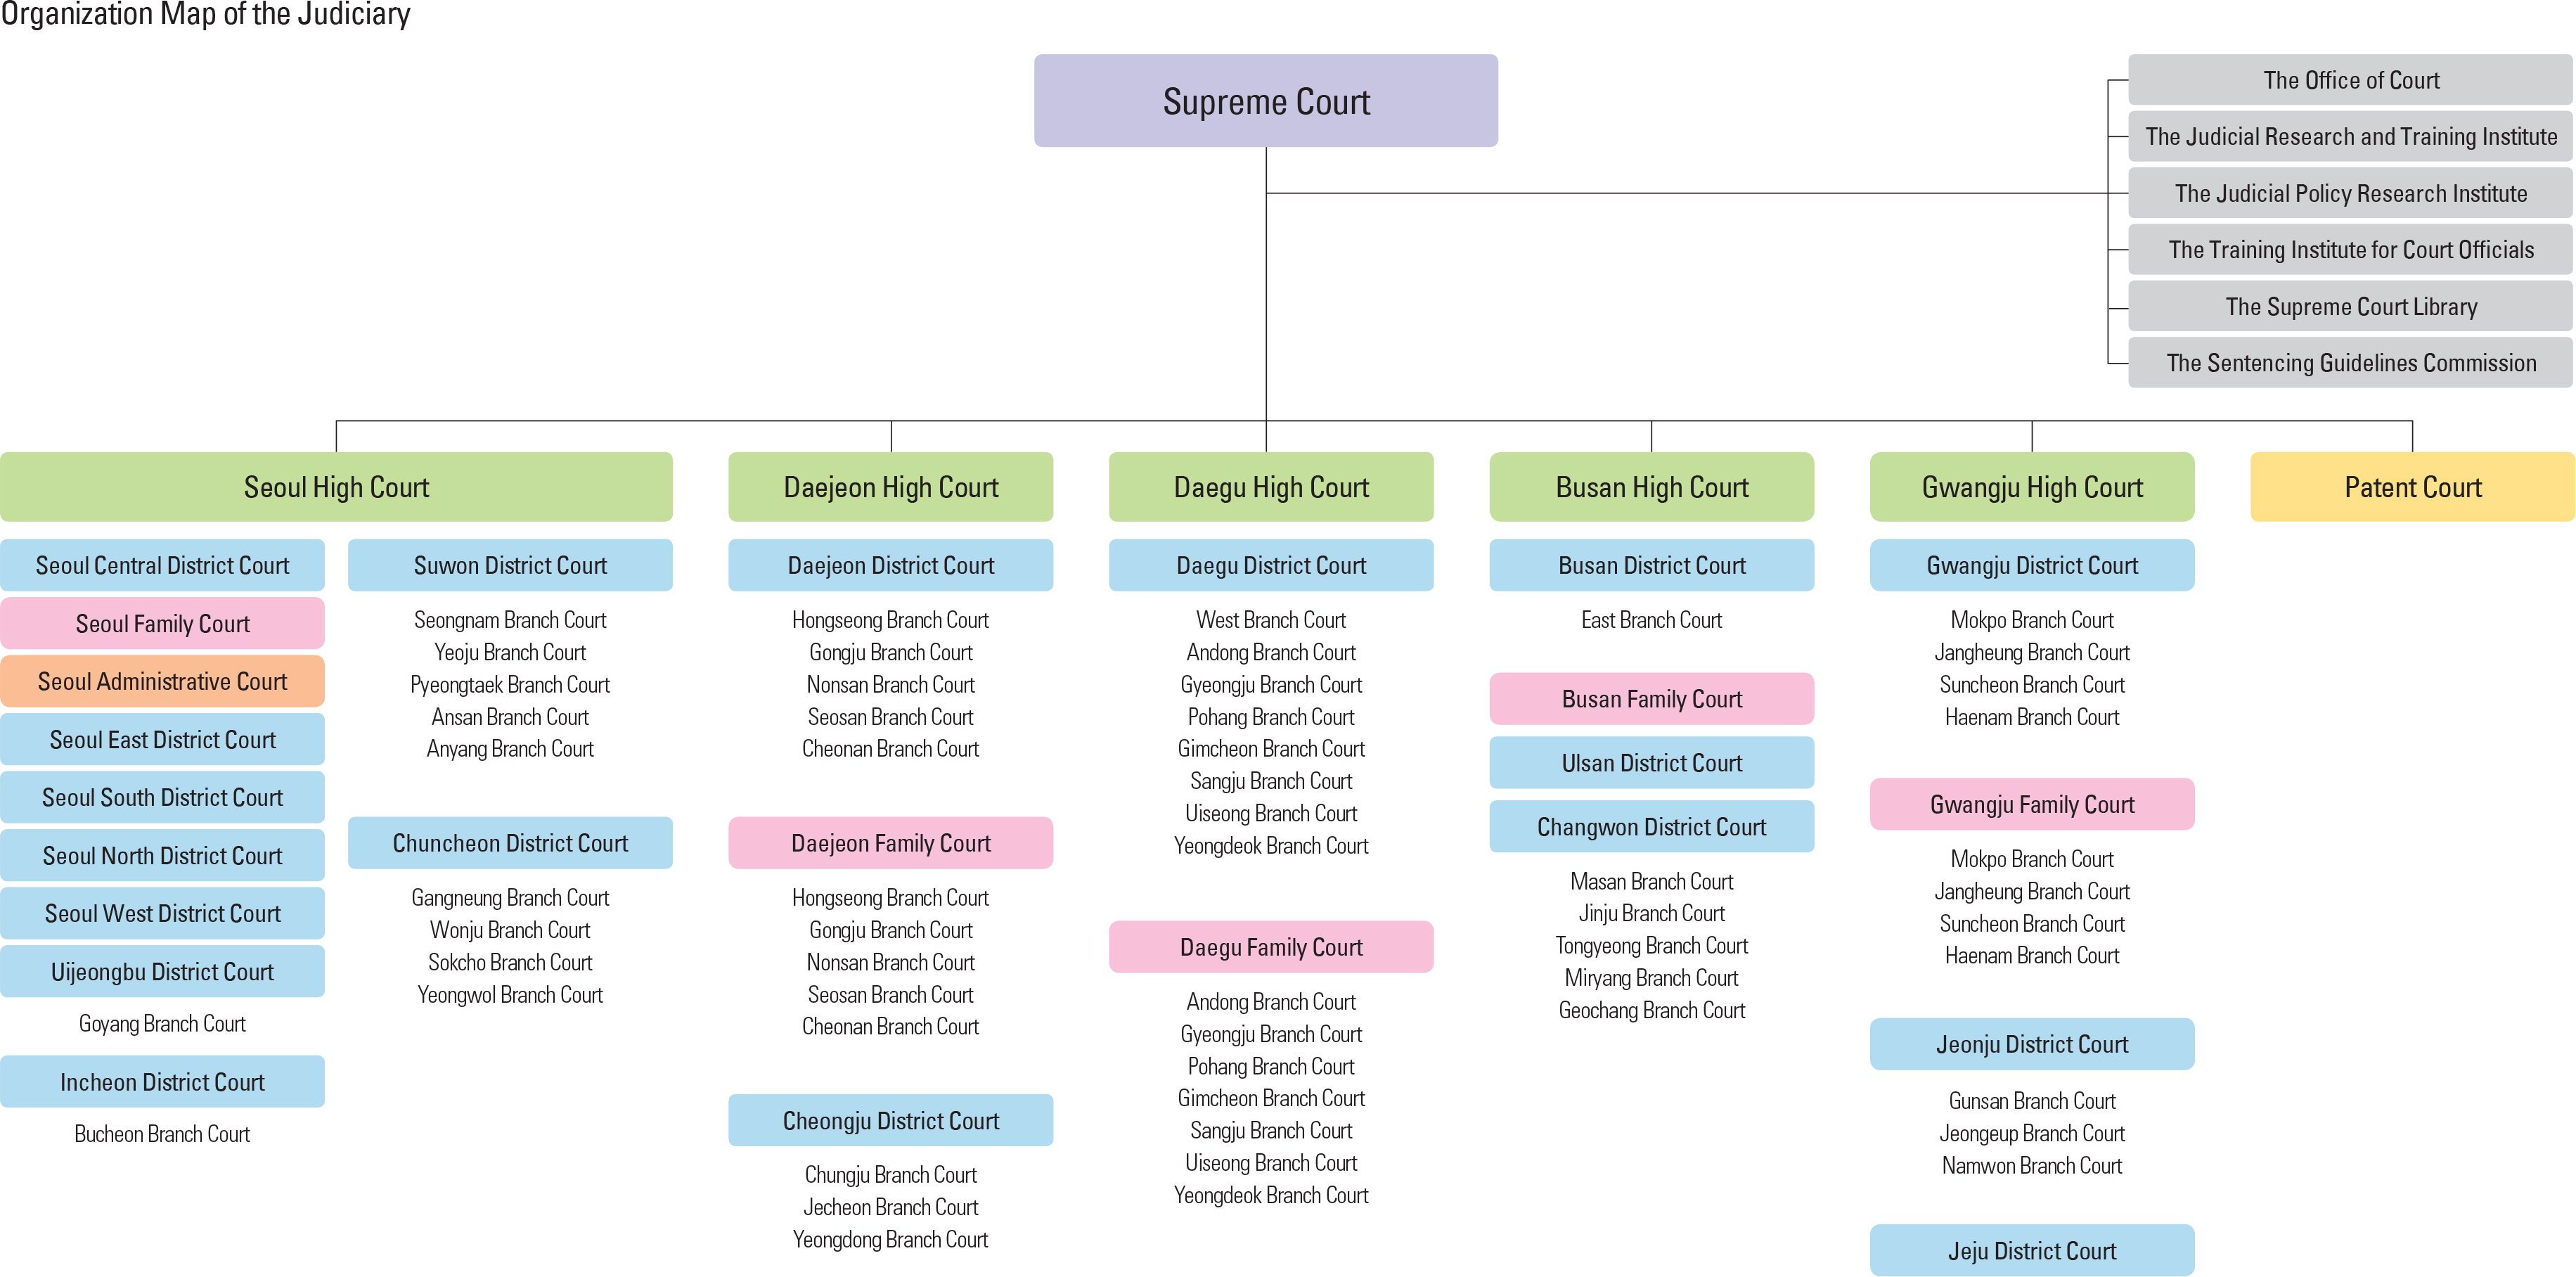 Organization Map of the Judiciary<p class="oz_zoom" zimg="http://imagedata.cafe24.com/us_1/us1_60-1_2.jpg"><span style="font-family:Nanum Myeongjo;"><span style="font-size:18px;"><span class="label label-danger">UPDATE DATA</span></span></p>